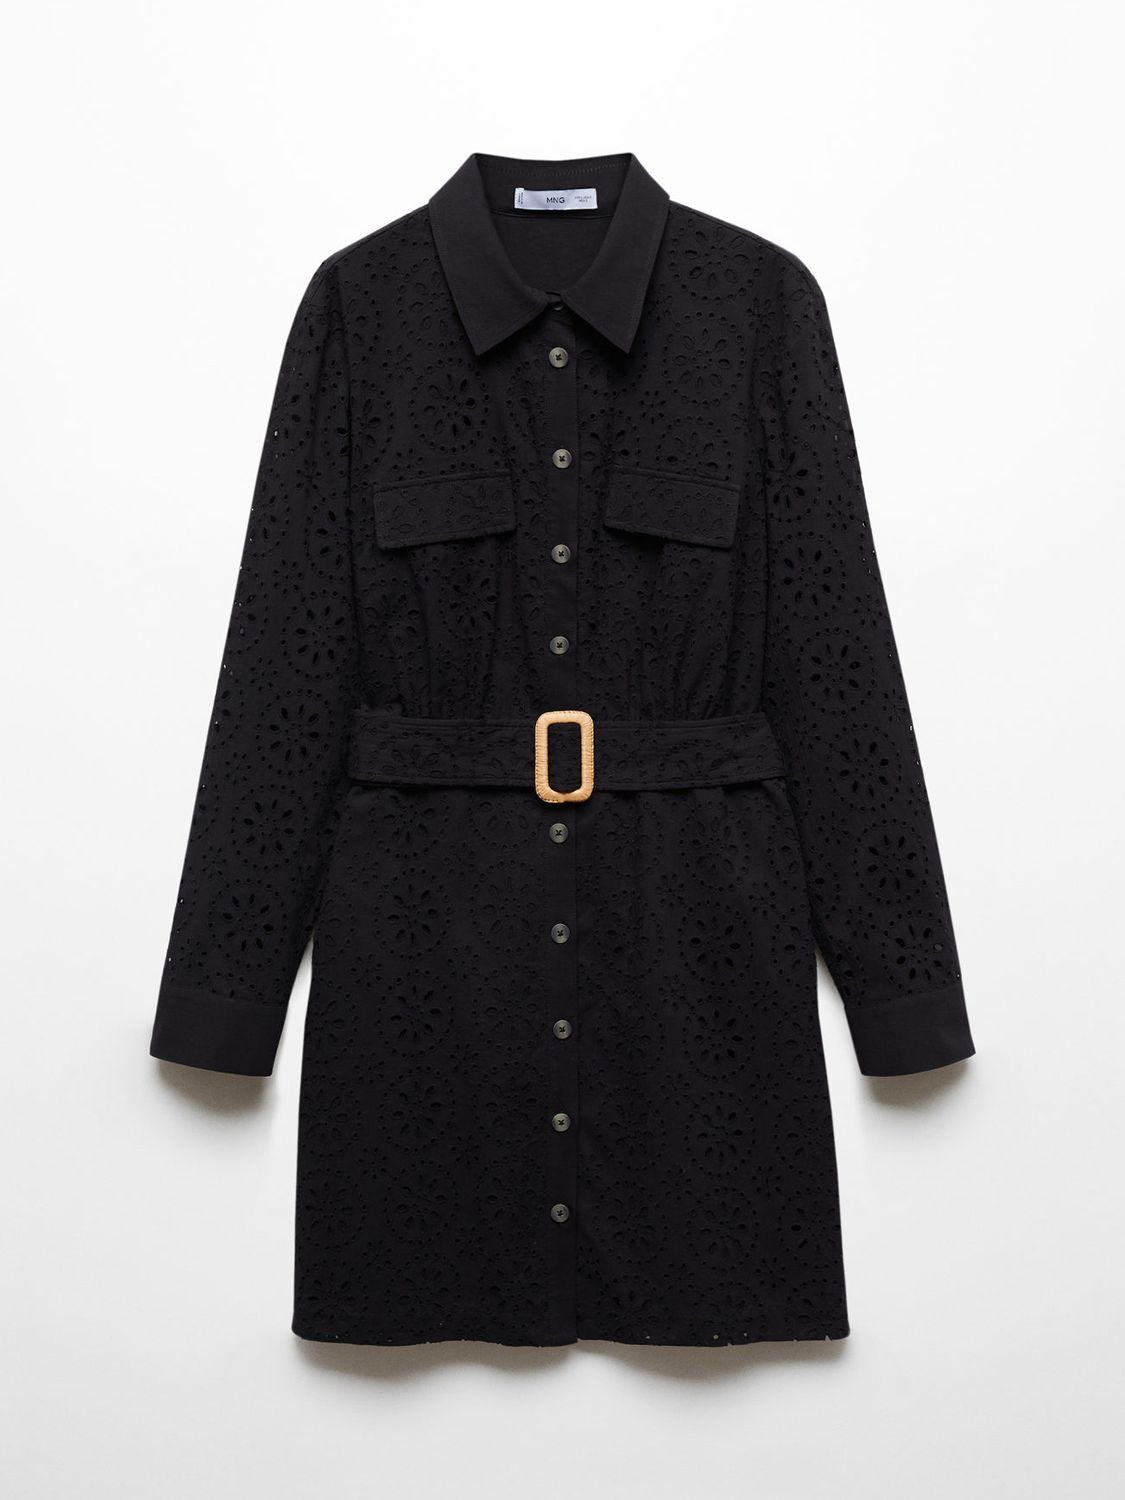 Buy Mango Shirly Broderie Anglaise Mini Shirt Dress Online at johnlewis.com